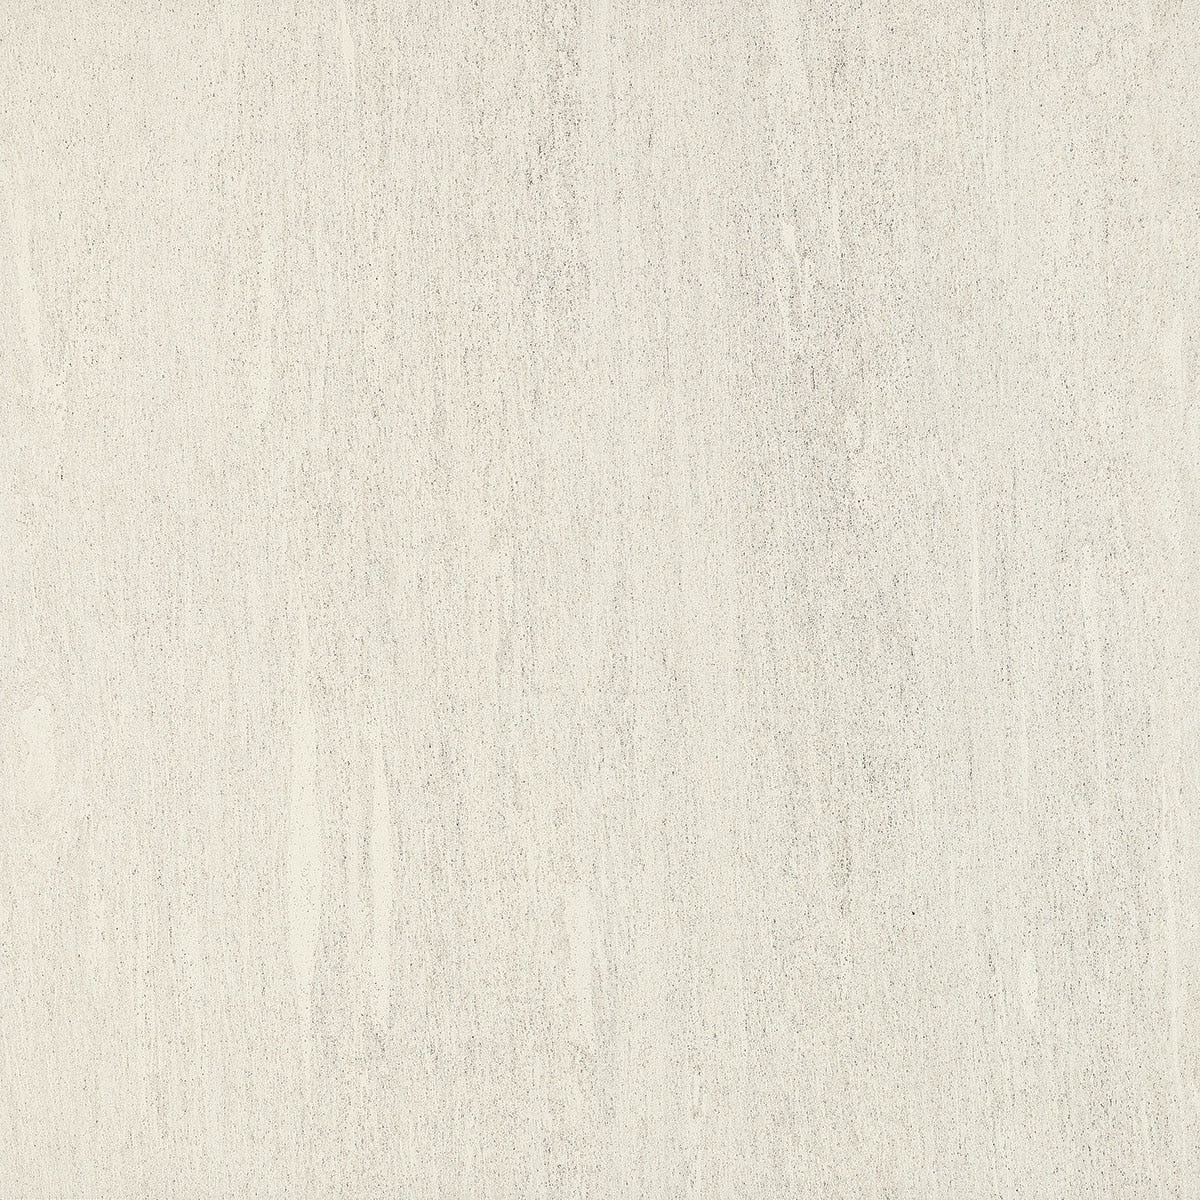 Dal Tile Ambassador Wanderlust WHT 12x24 (please call for special pricing)